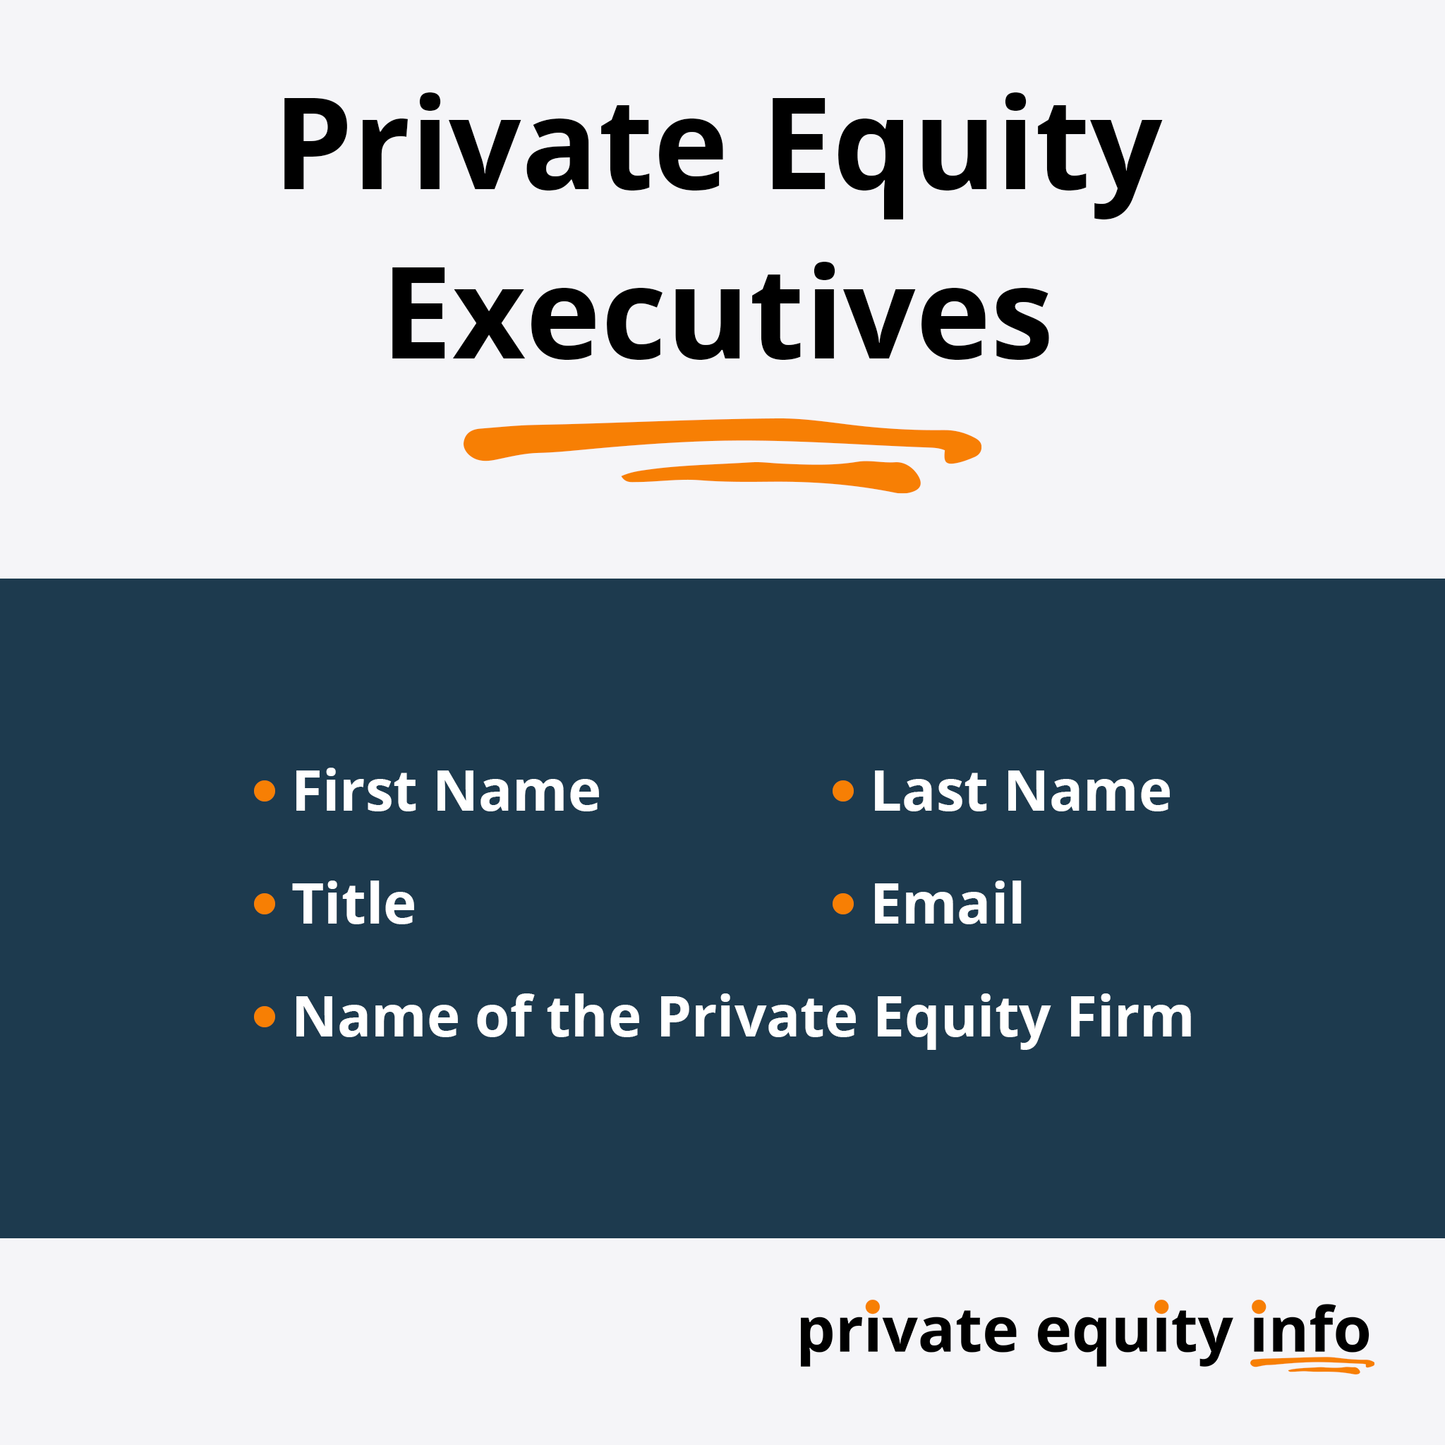 List of Private Equity Firms in the Wealth Management industry